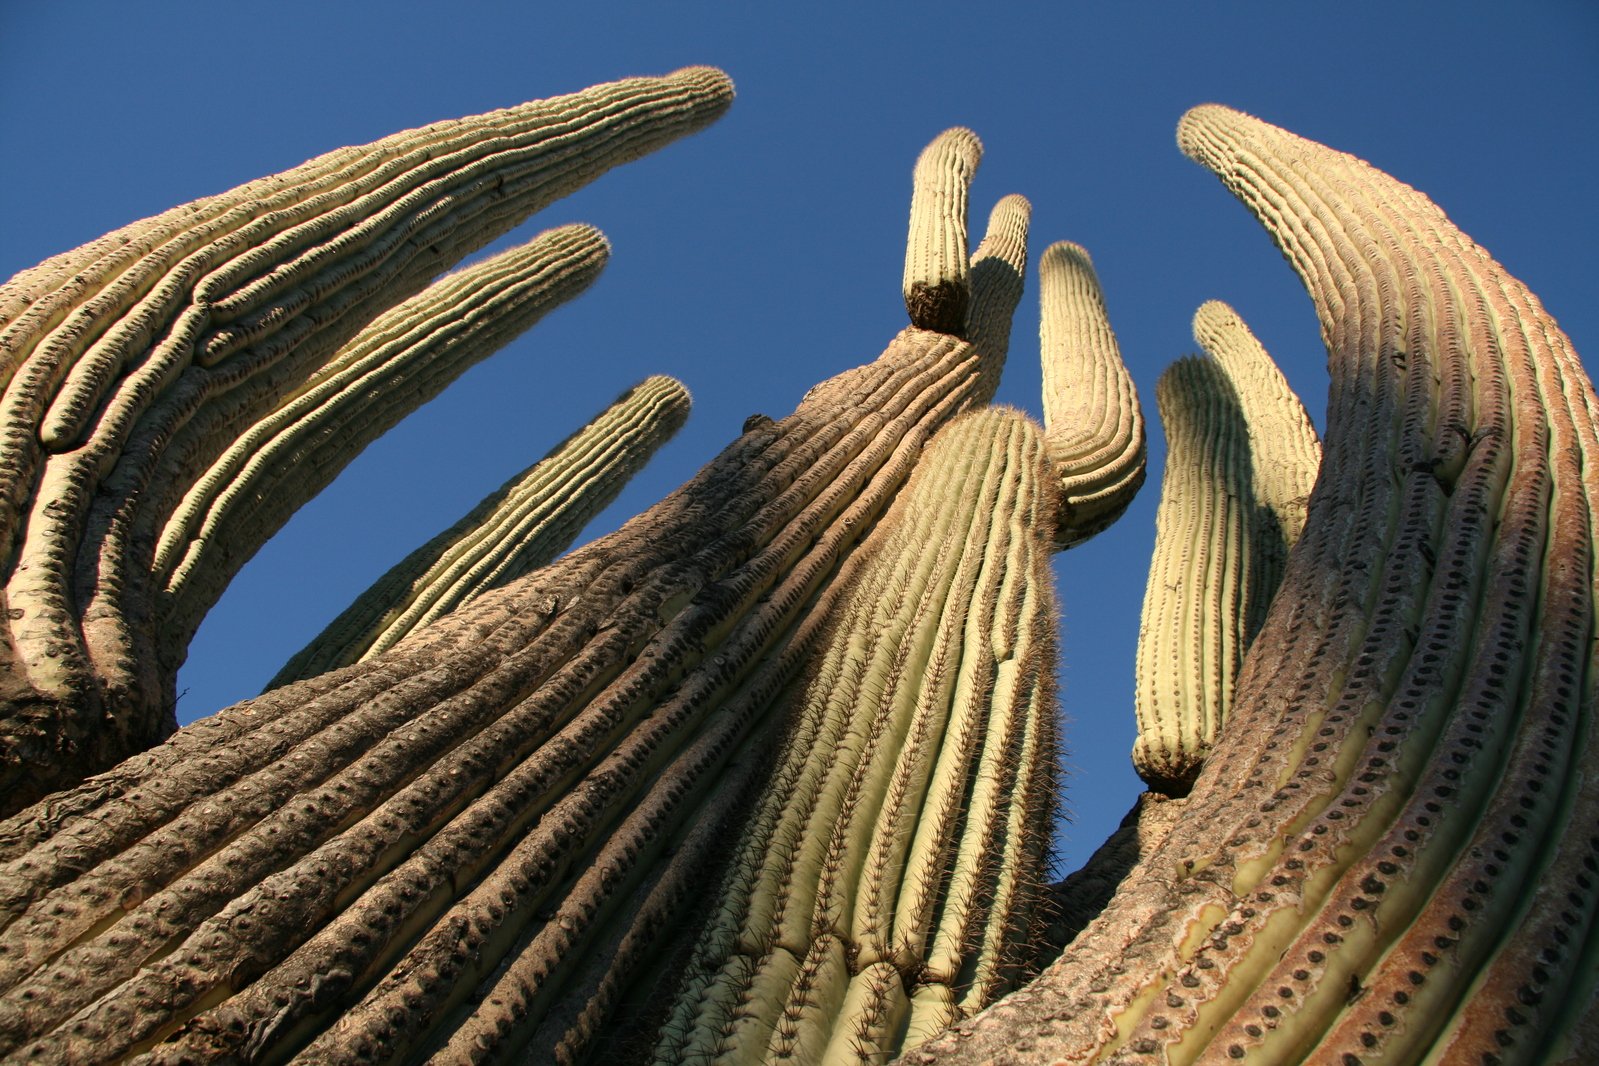 an image of a huge cactus with large limbs